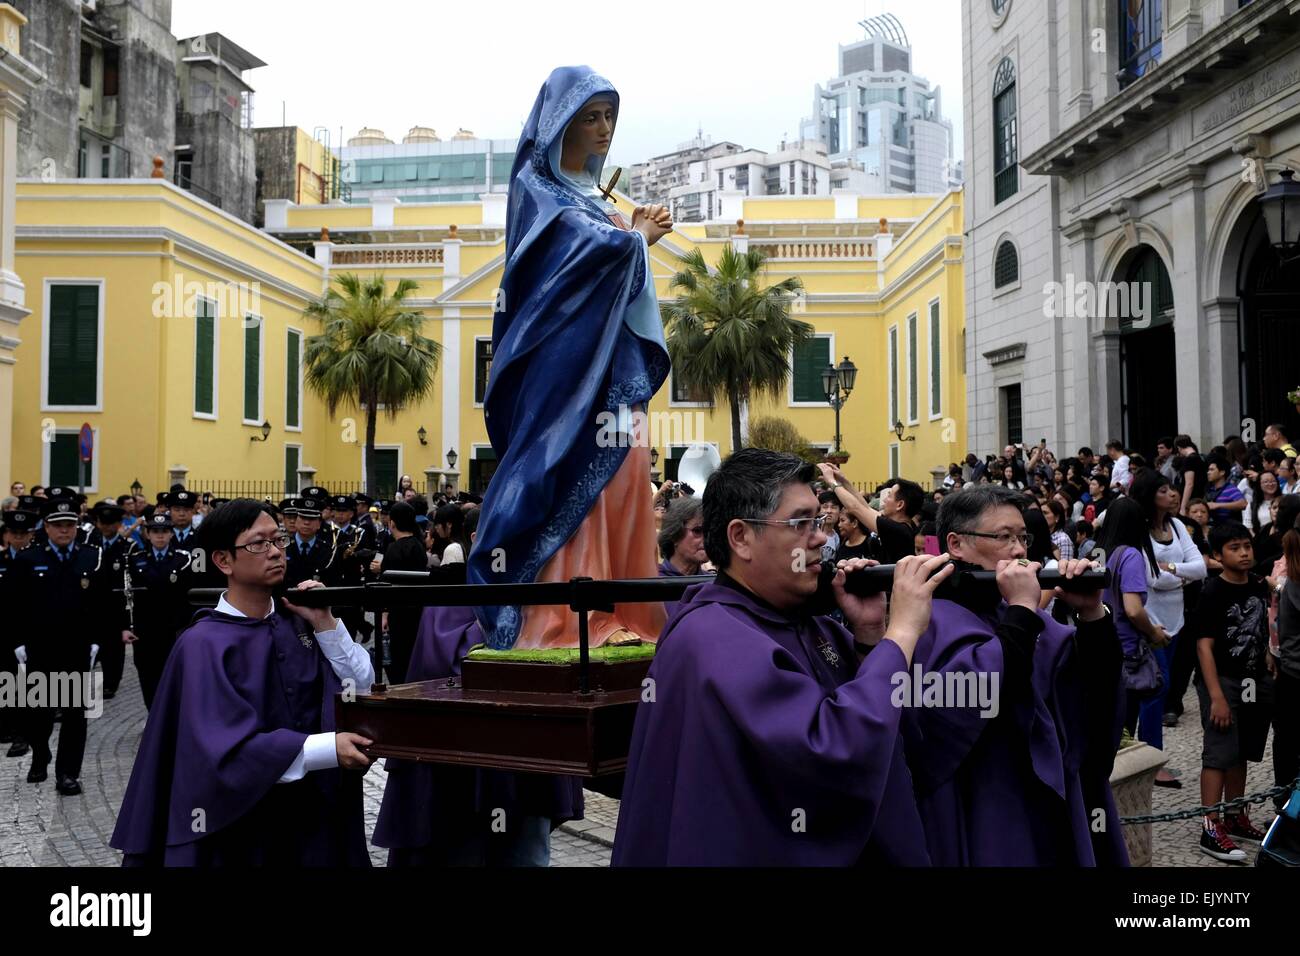 Statue of Our Lady being carried though Macau during Good Friday Procession Stock Photo